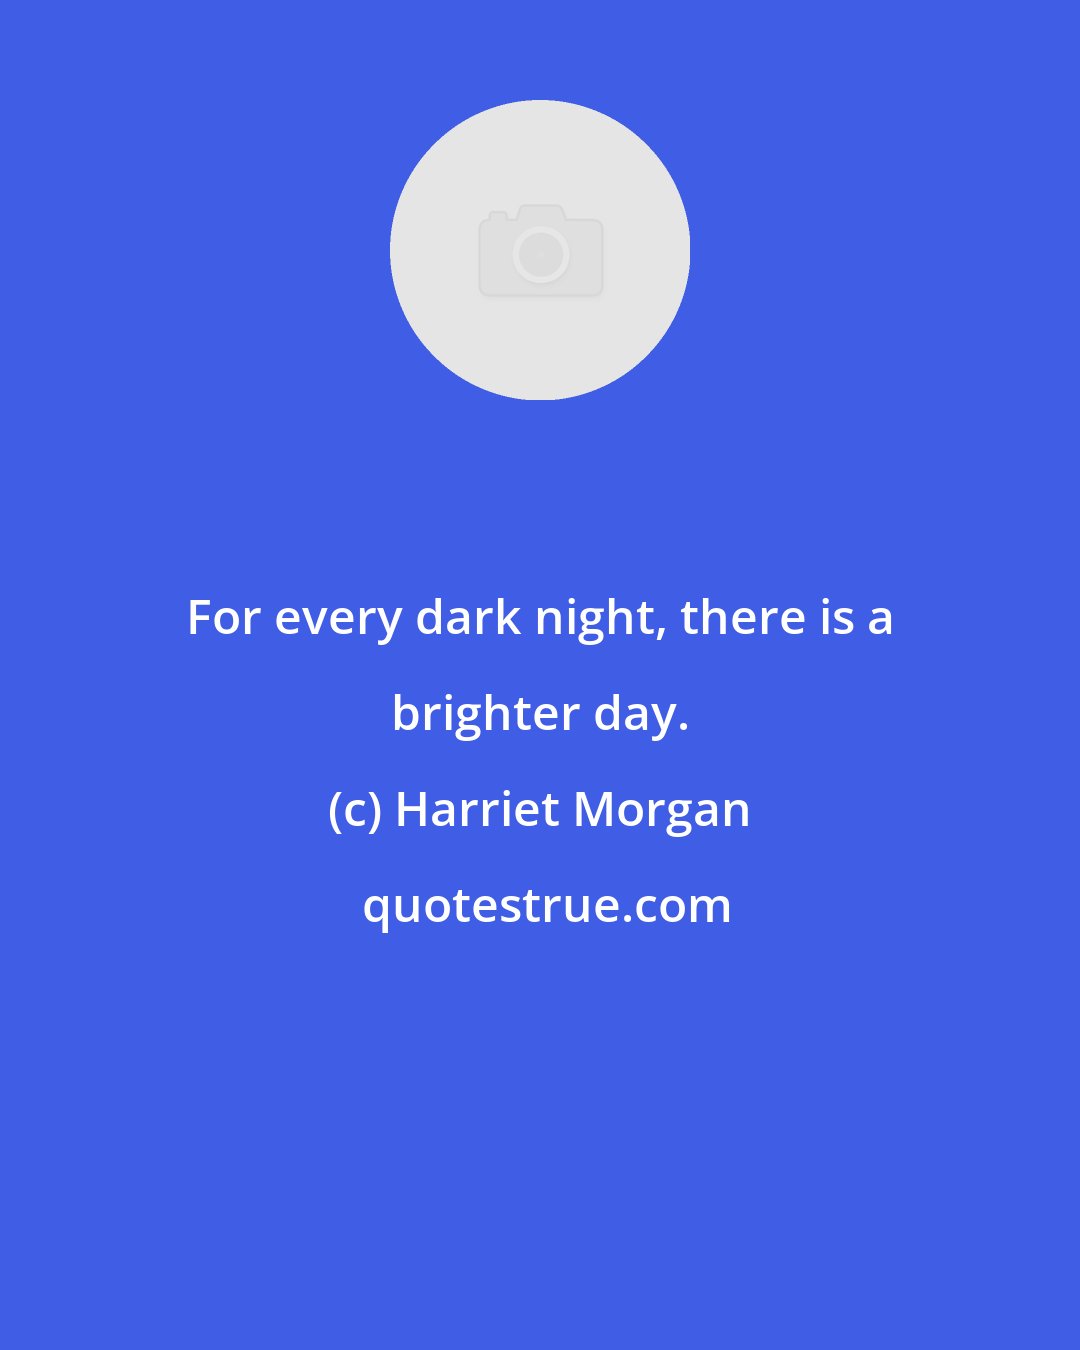 Harriet Morgan: For every dark night, there is a brighter day.